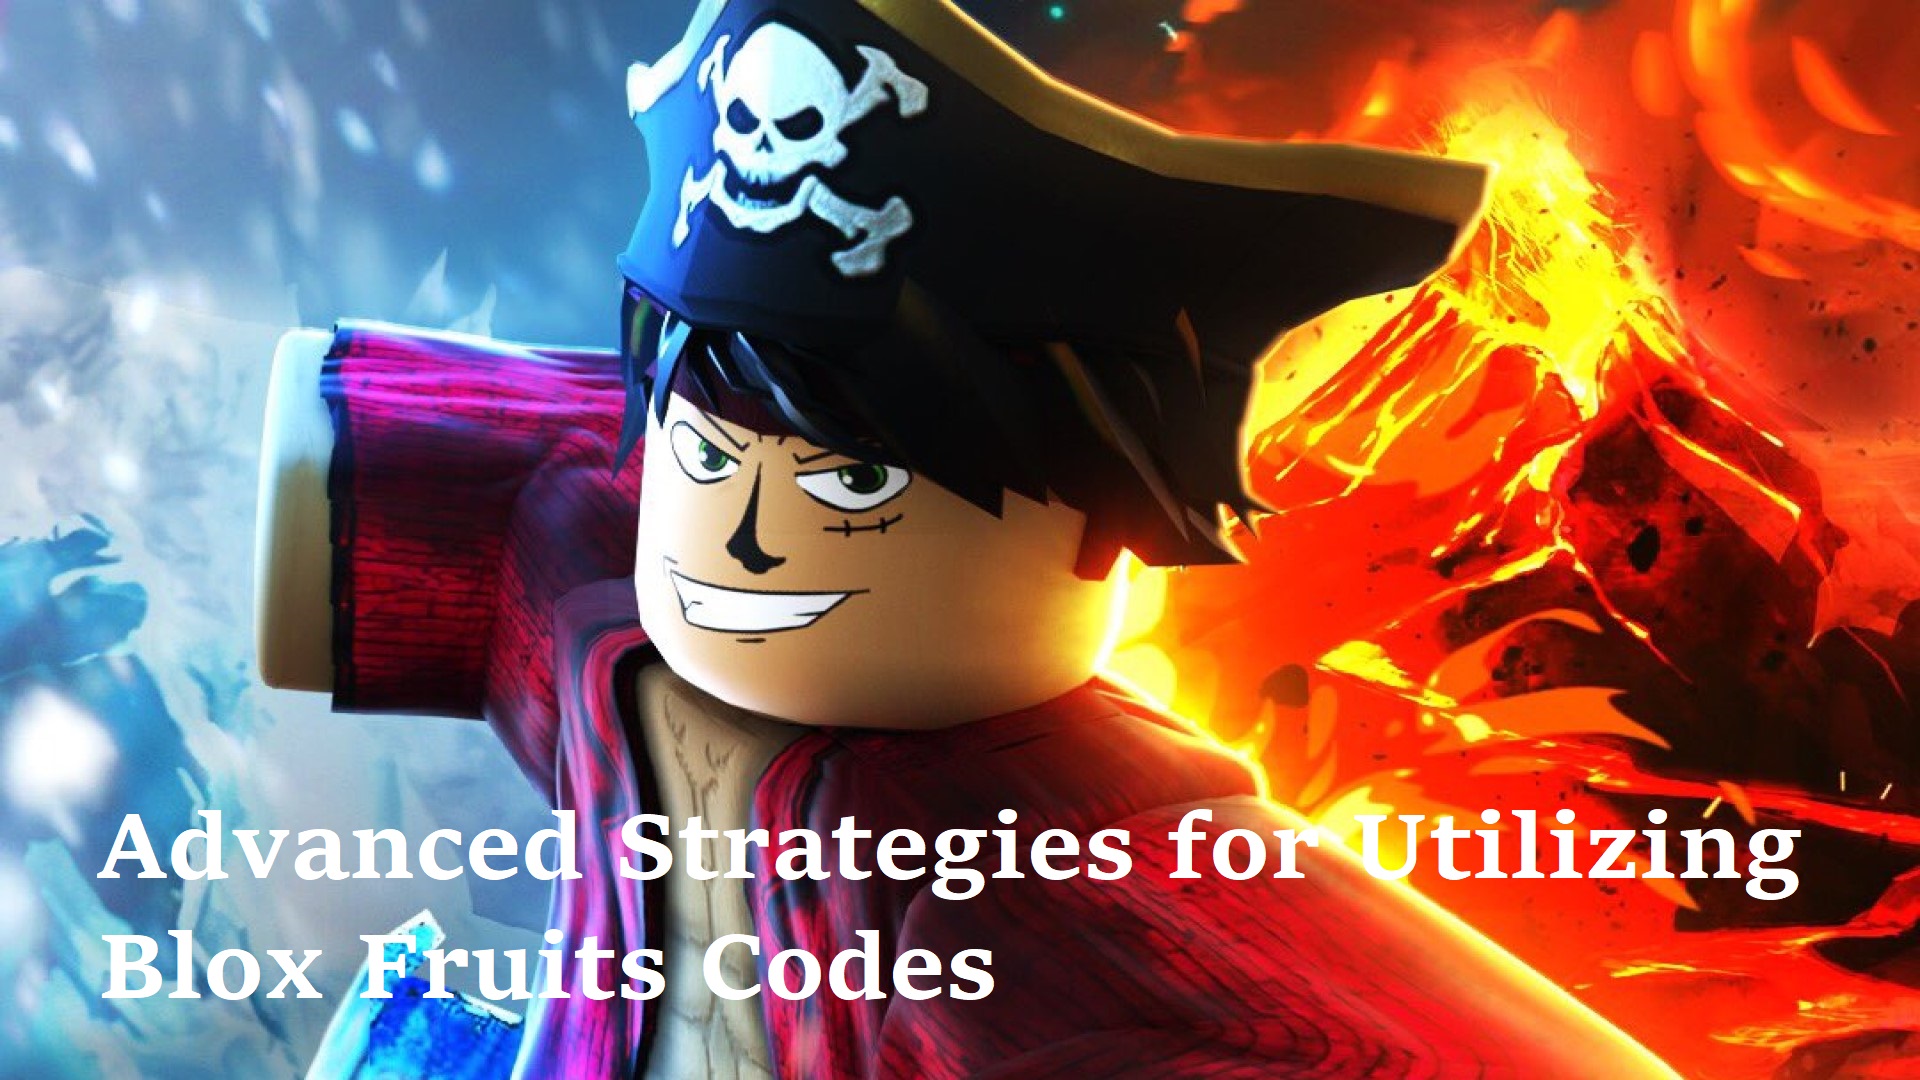 Advanced Strategies for Utilizing Blox Fruits Codes